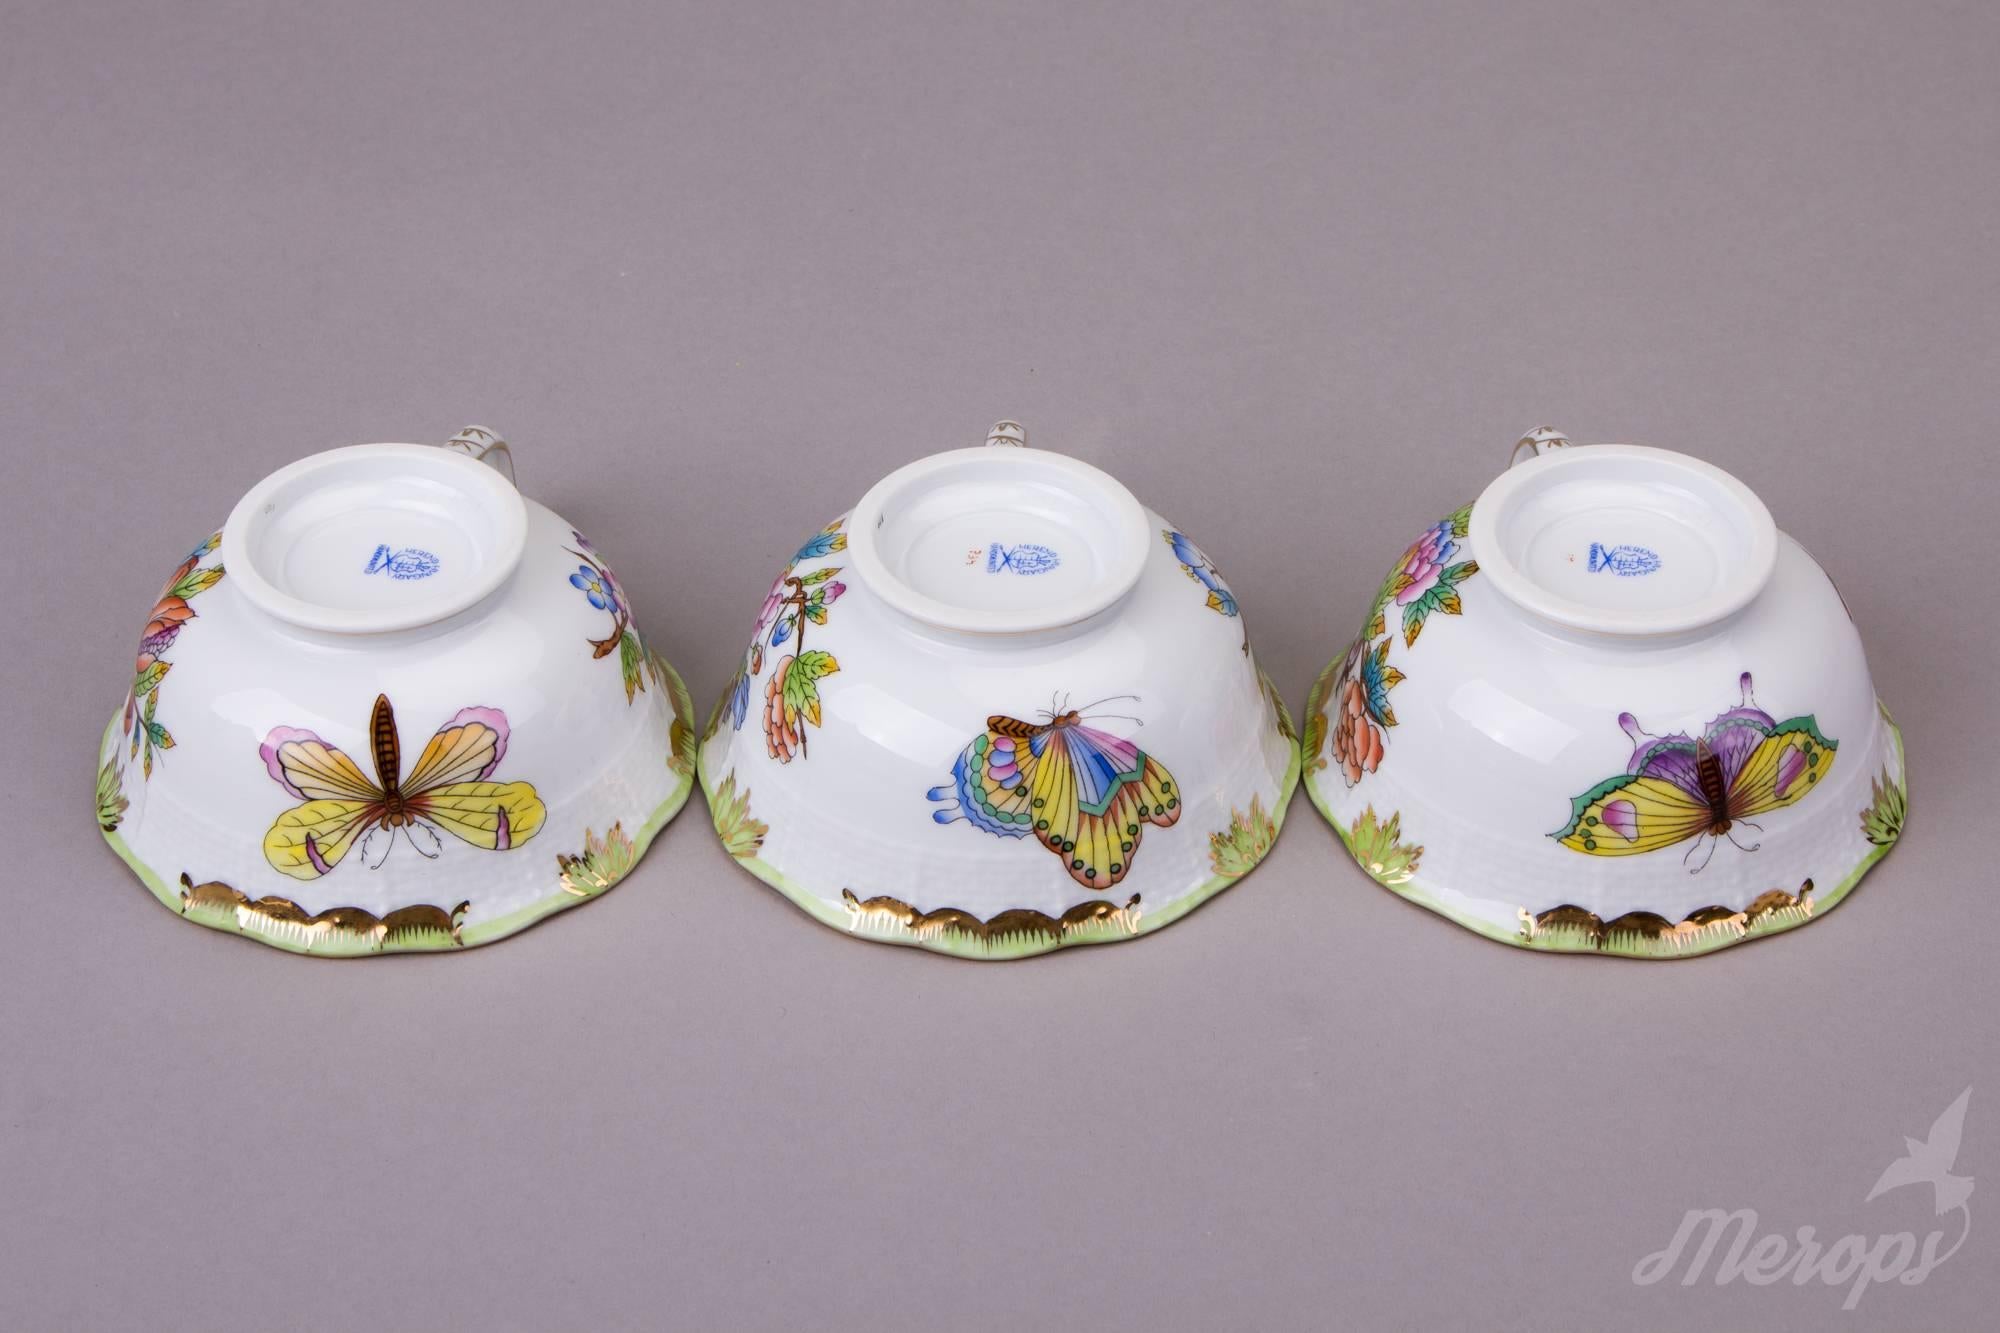 Mid-20th Century Herend Queen Victoria Tea Set for Six Persons, circa 1960